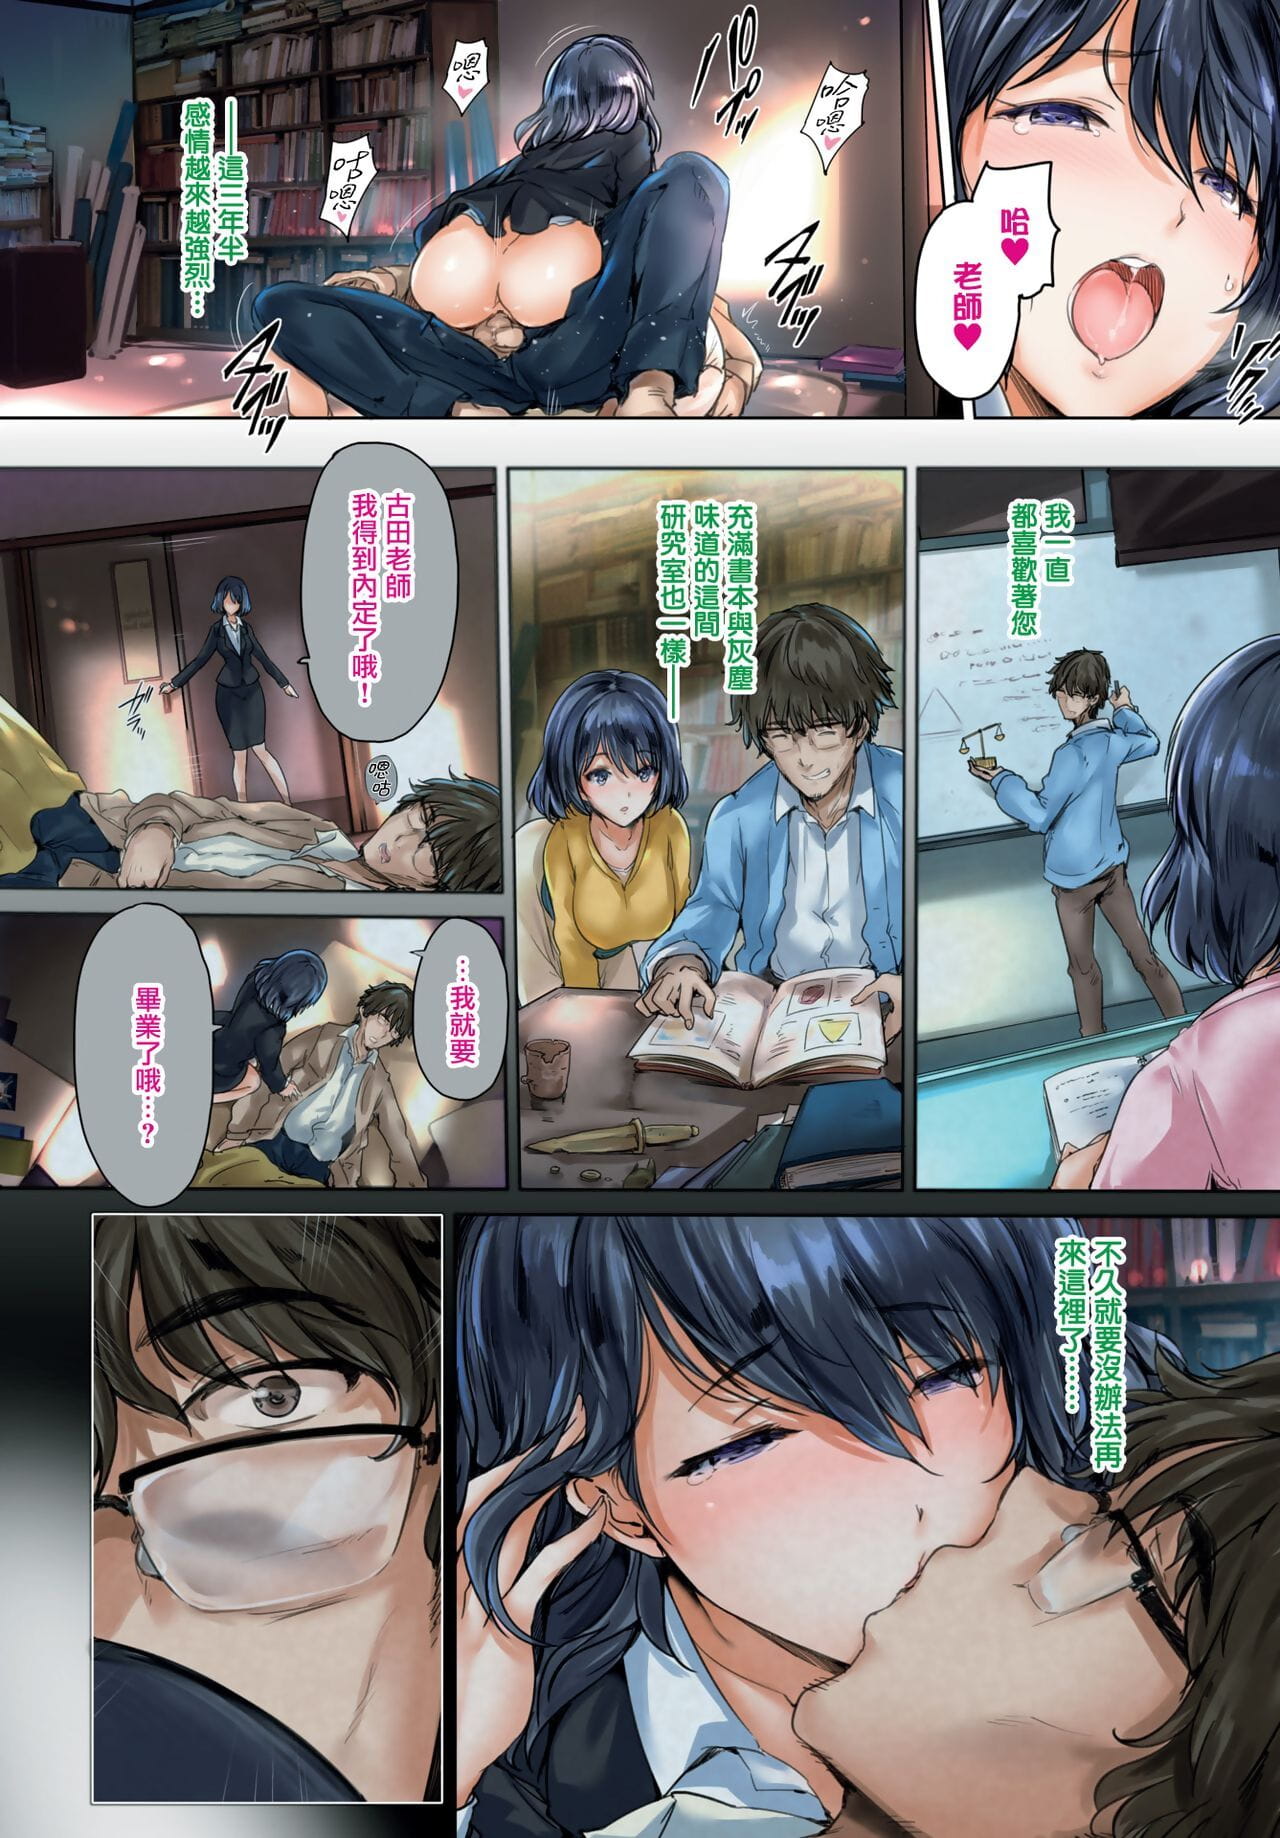 Maruwa Tarou To the Man Who Lives in the Study Room COMIC BAVEL 2019-01 Chinese 無邪気漢化組 Digital